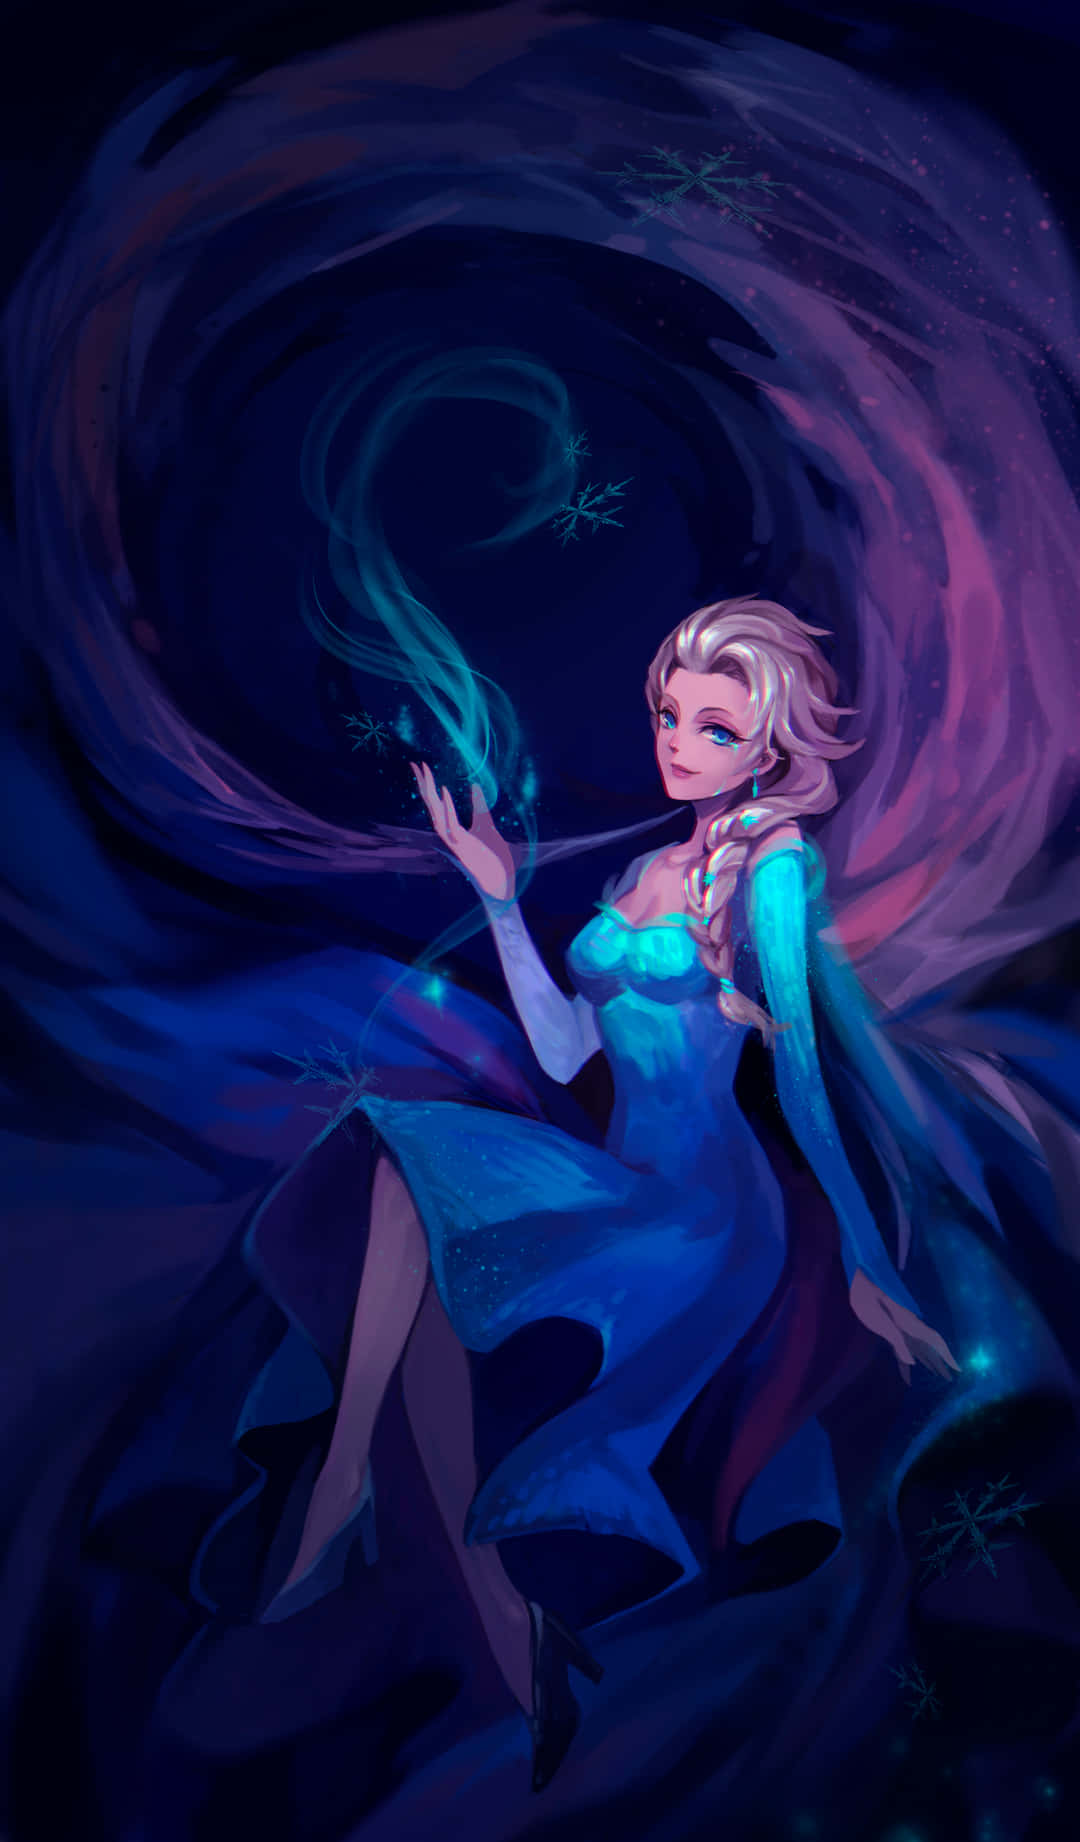 Get connected with Elsa Phone Wallpaper